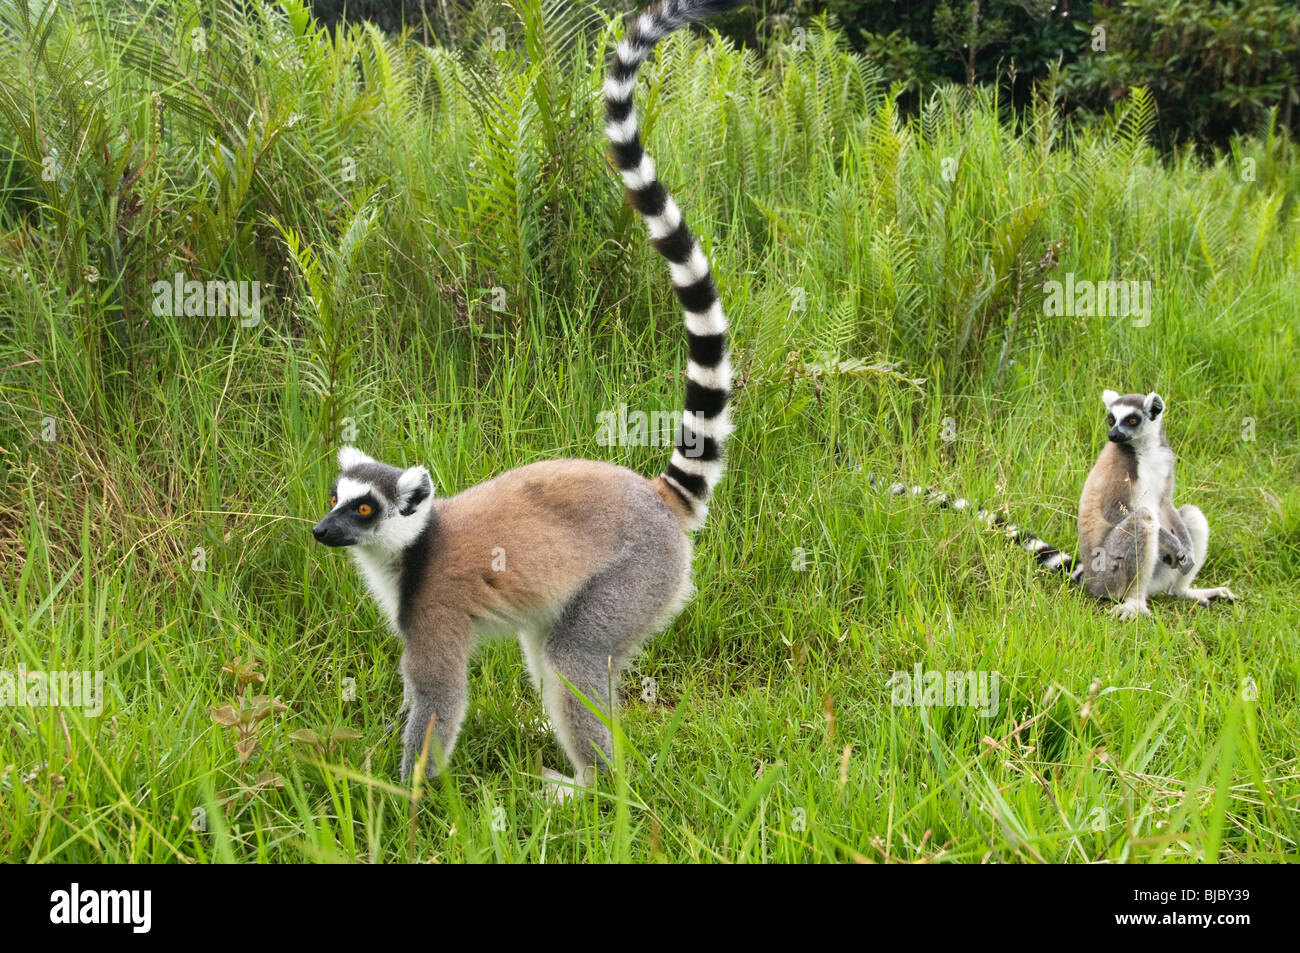 Ring tailed lemurs playing in some grass Stock Photo